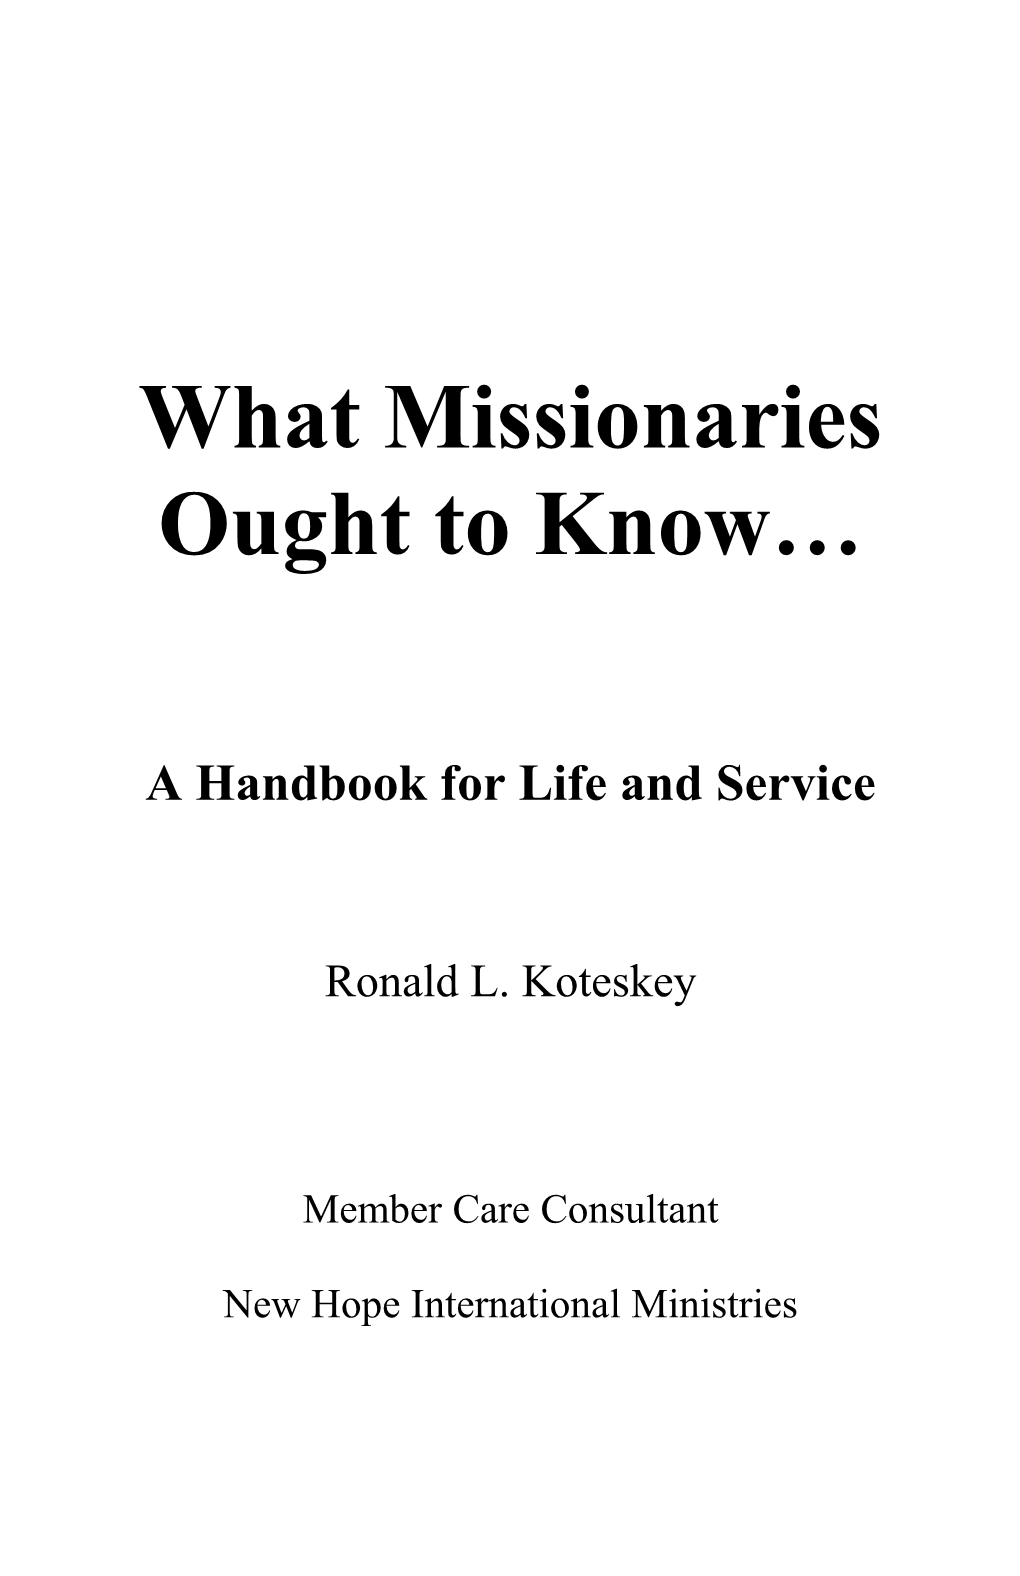 What Missionaries Ought to Know